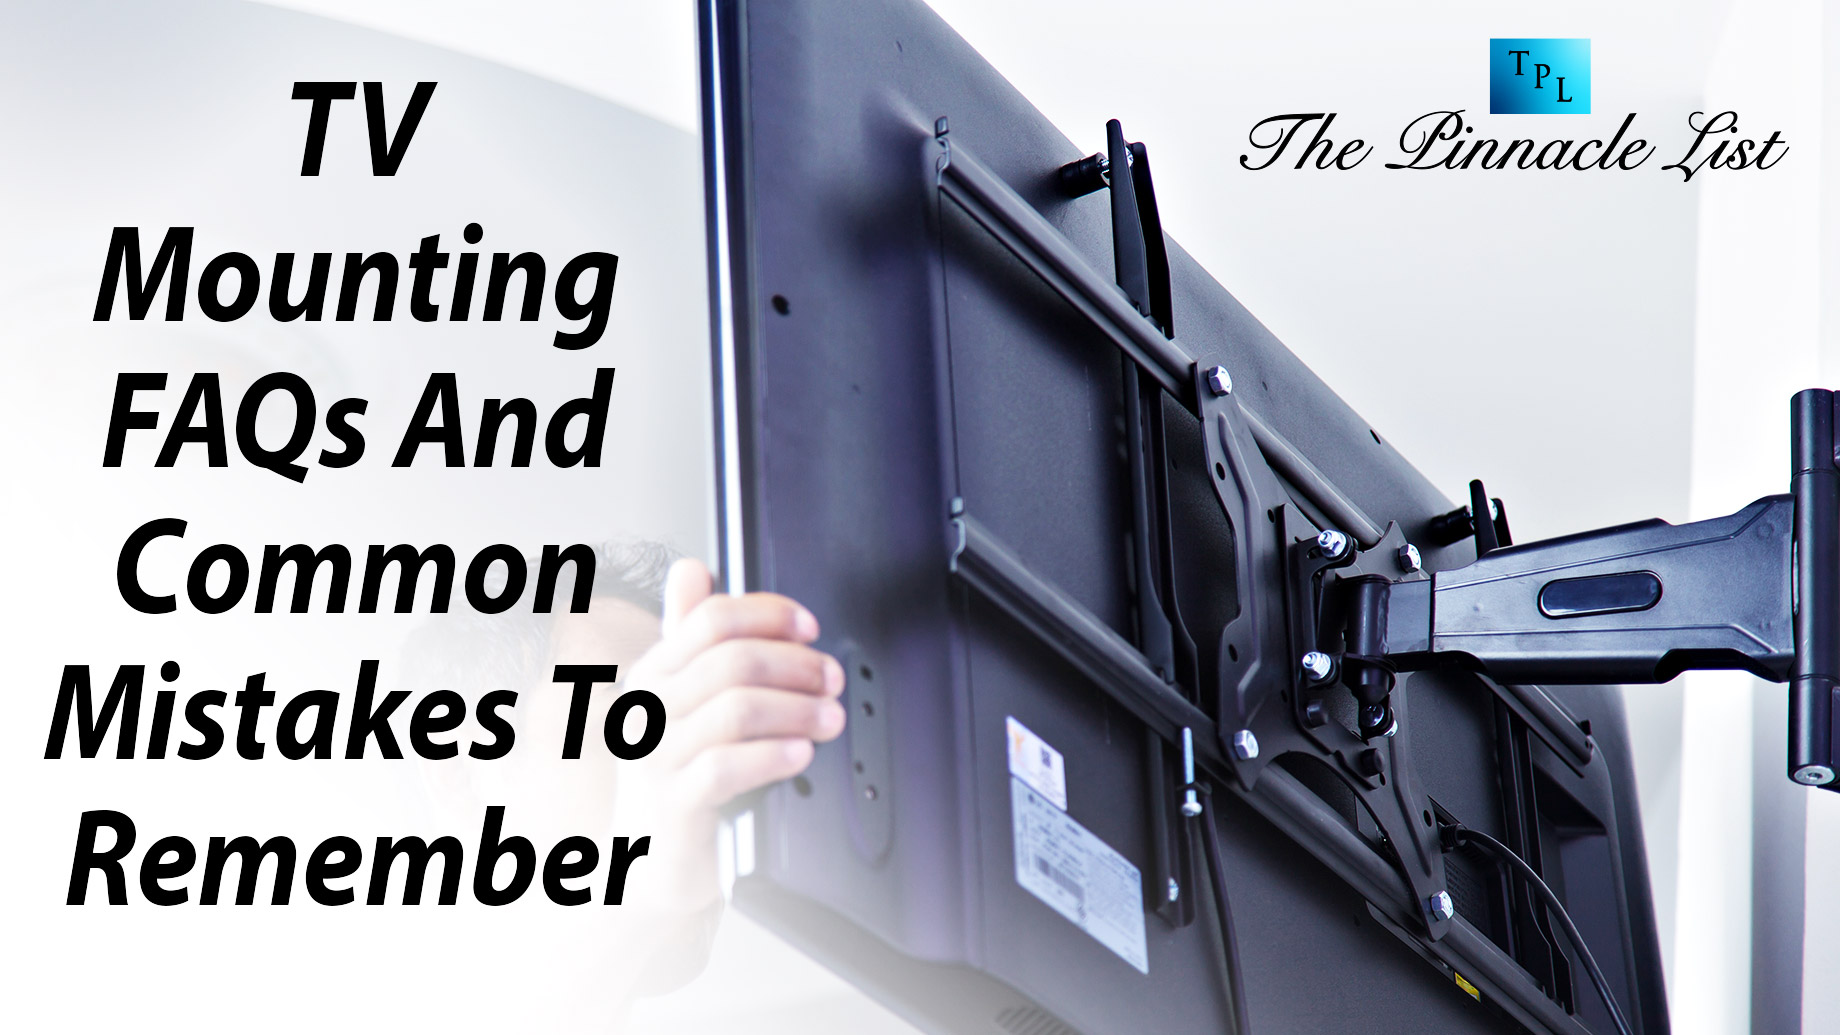 TV Mounting FAQs And Common Mistakes To Remember